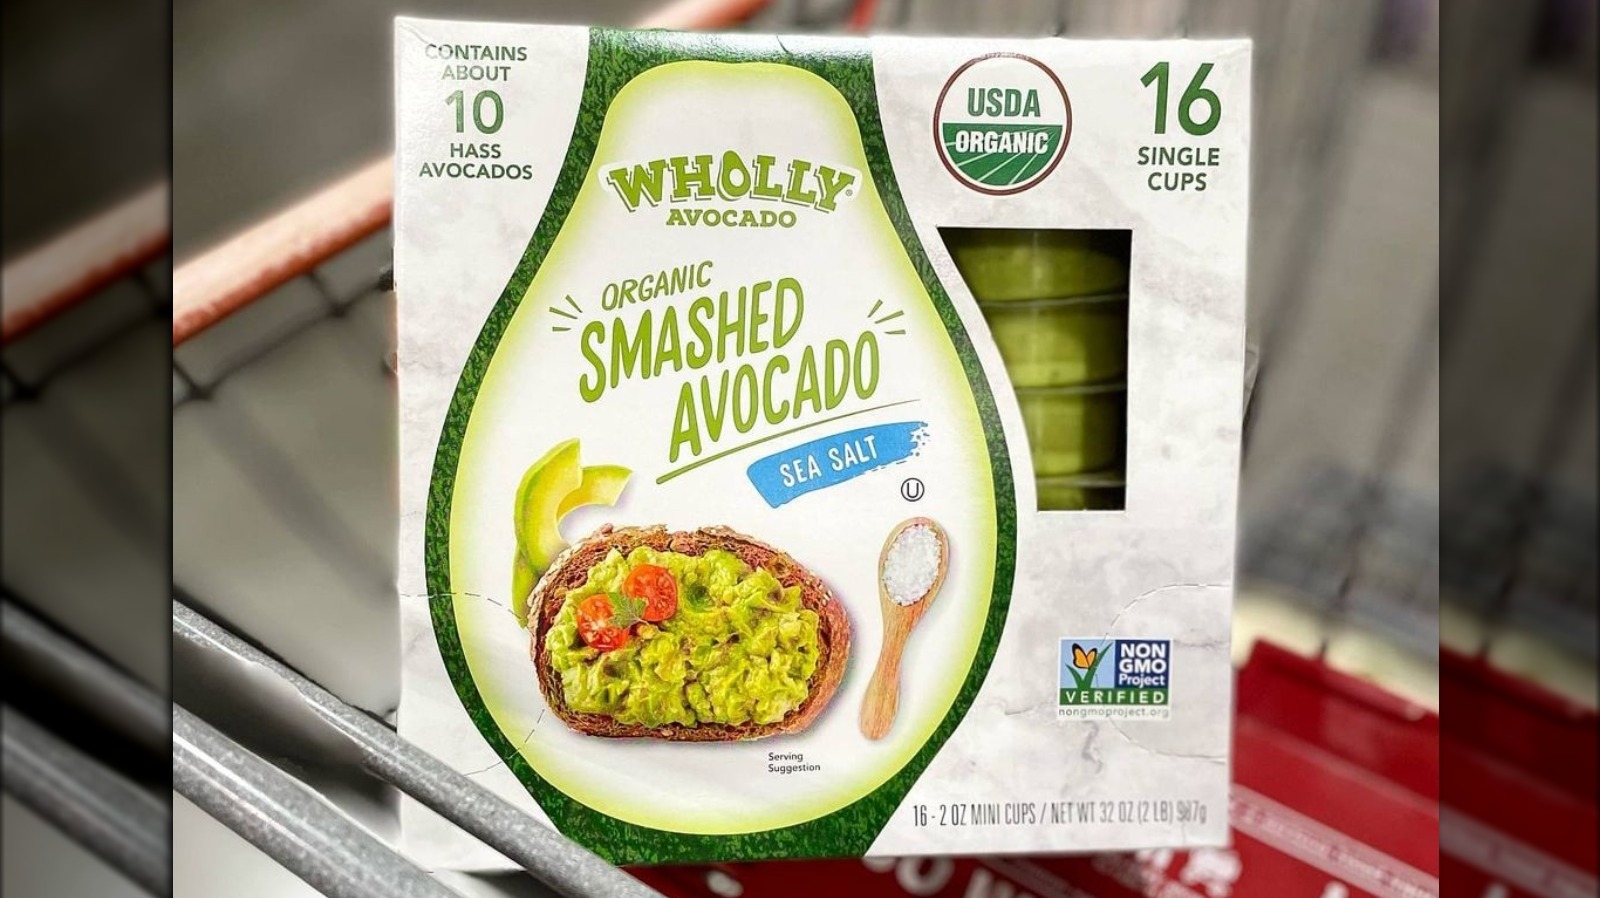 This Smashed Avocado From Costco Makes Meal Prep A Snap